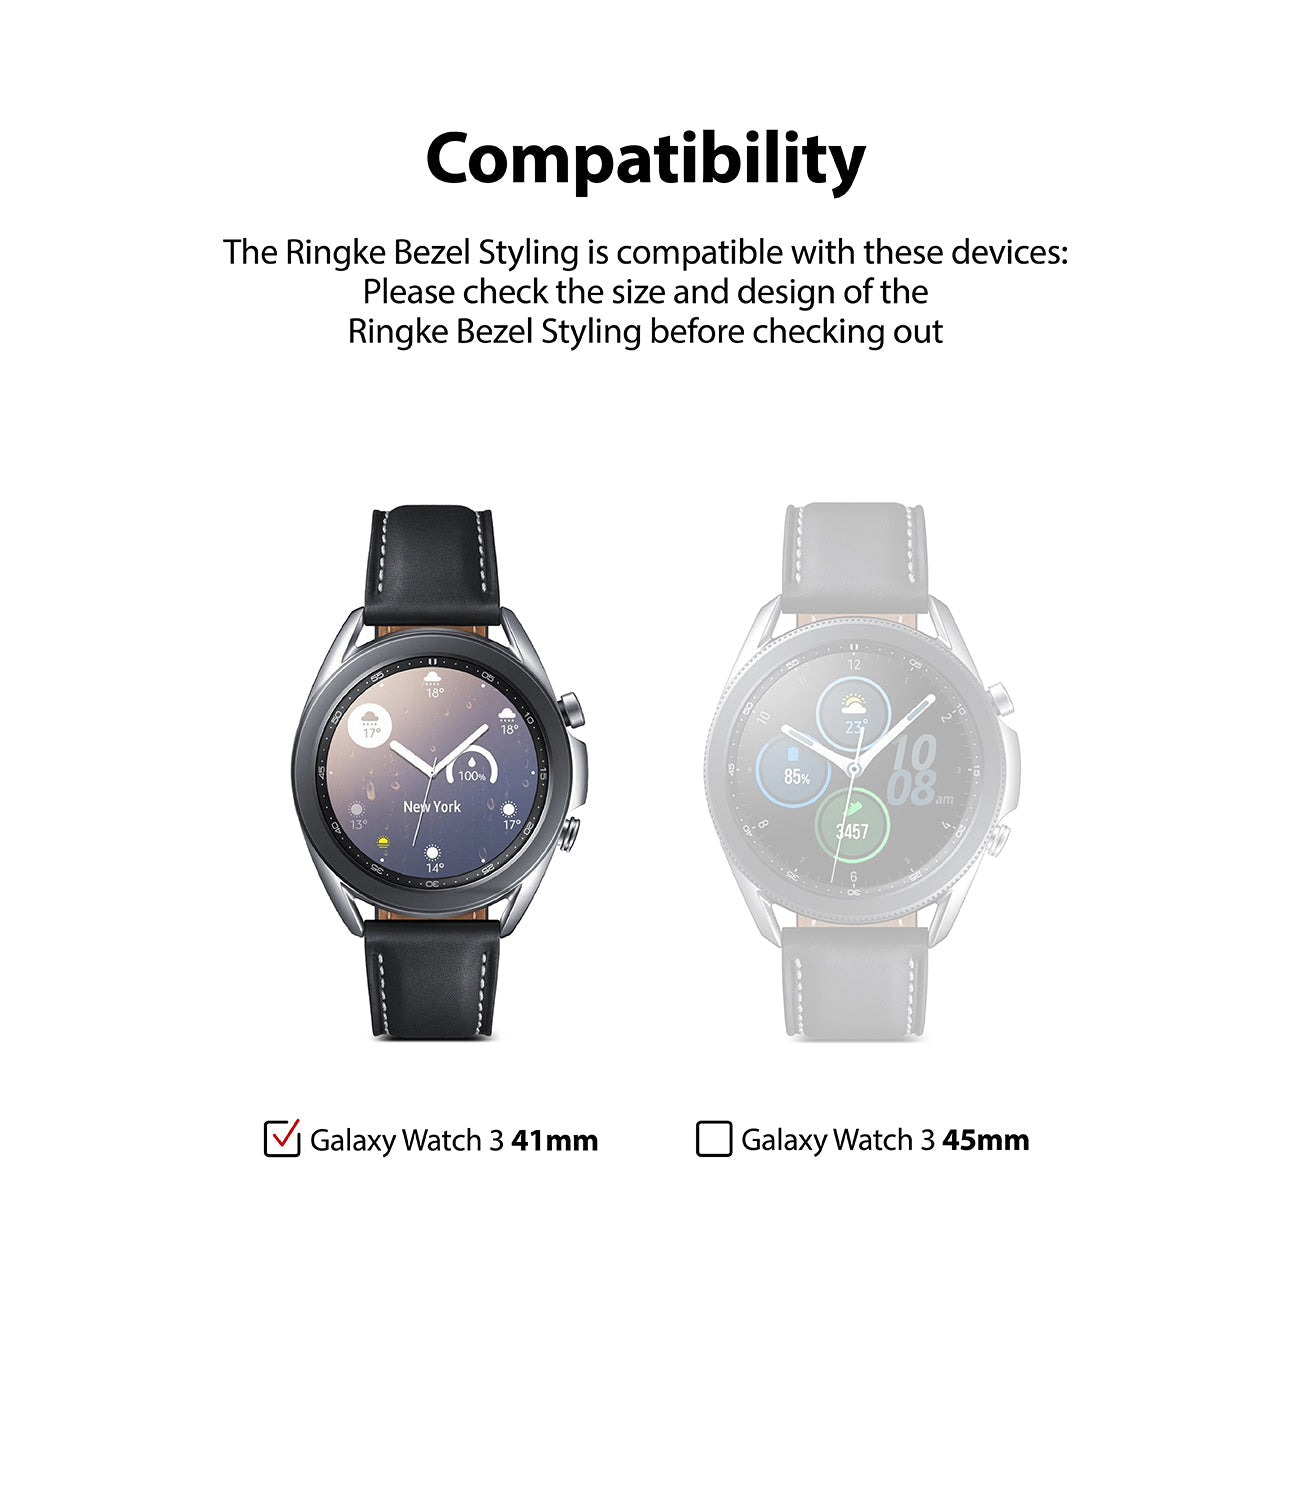 only compatible with galaxy watch 3 41mm 2020